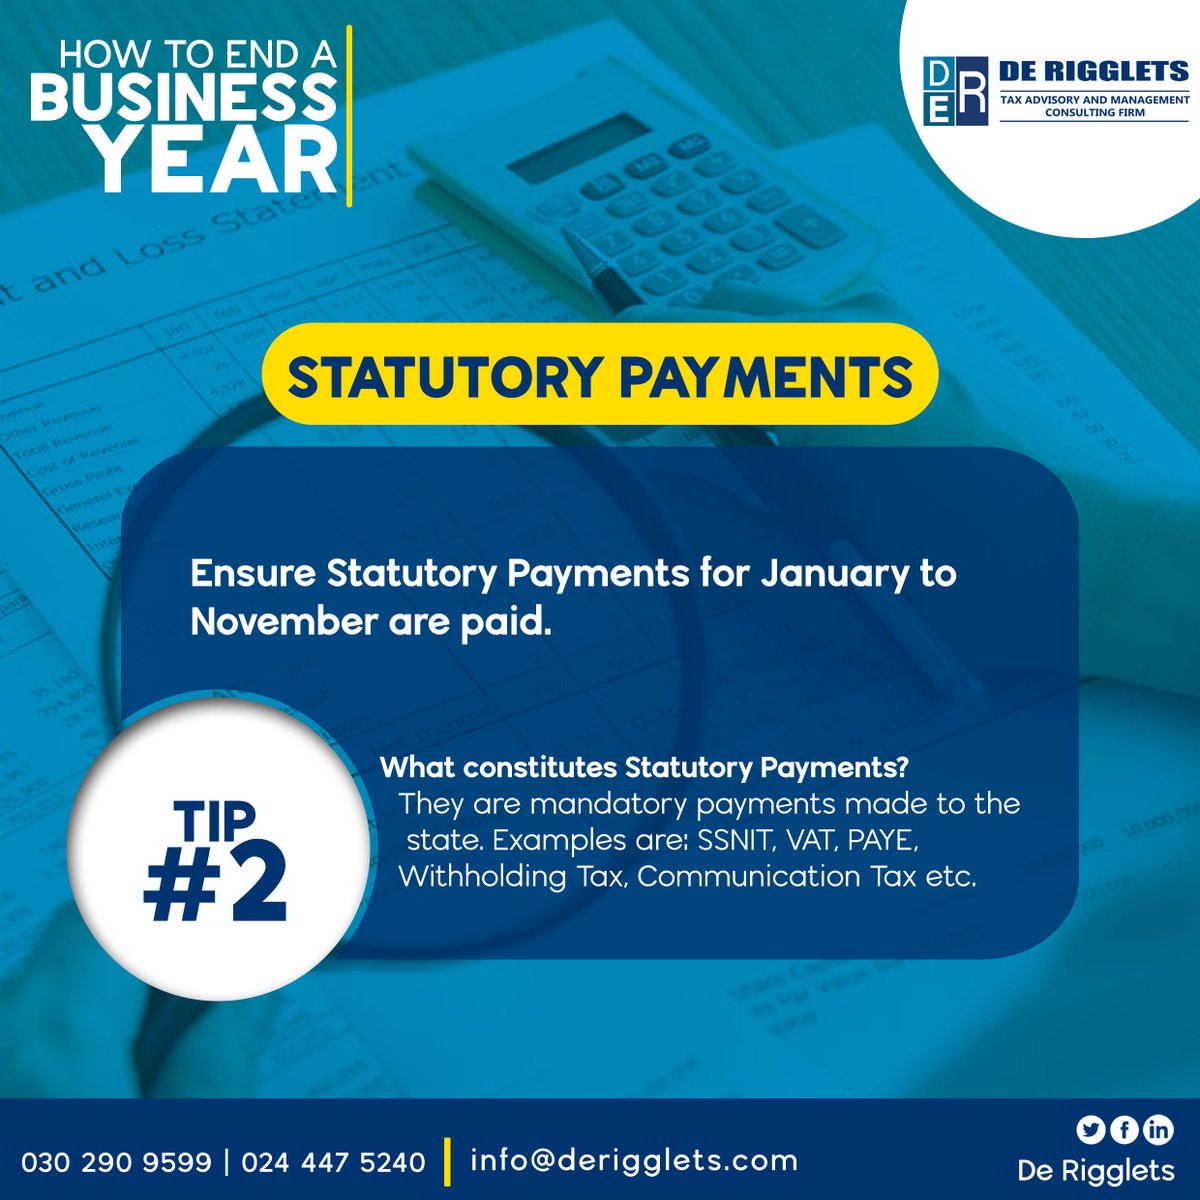 How to end a business year... #Tip2 
Ensure Statutory Payments for January to November are paid.

#StatutoryPayments #Tips #businesses #derigglets